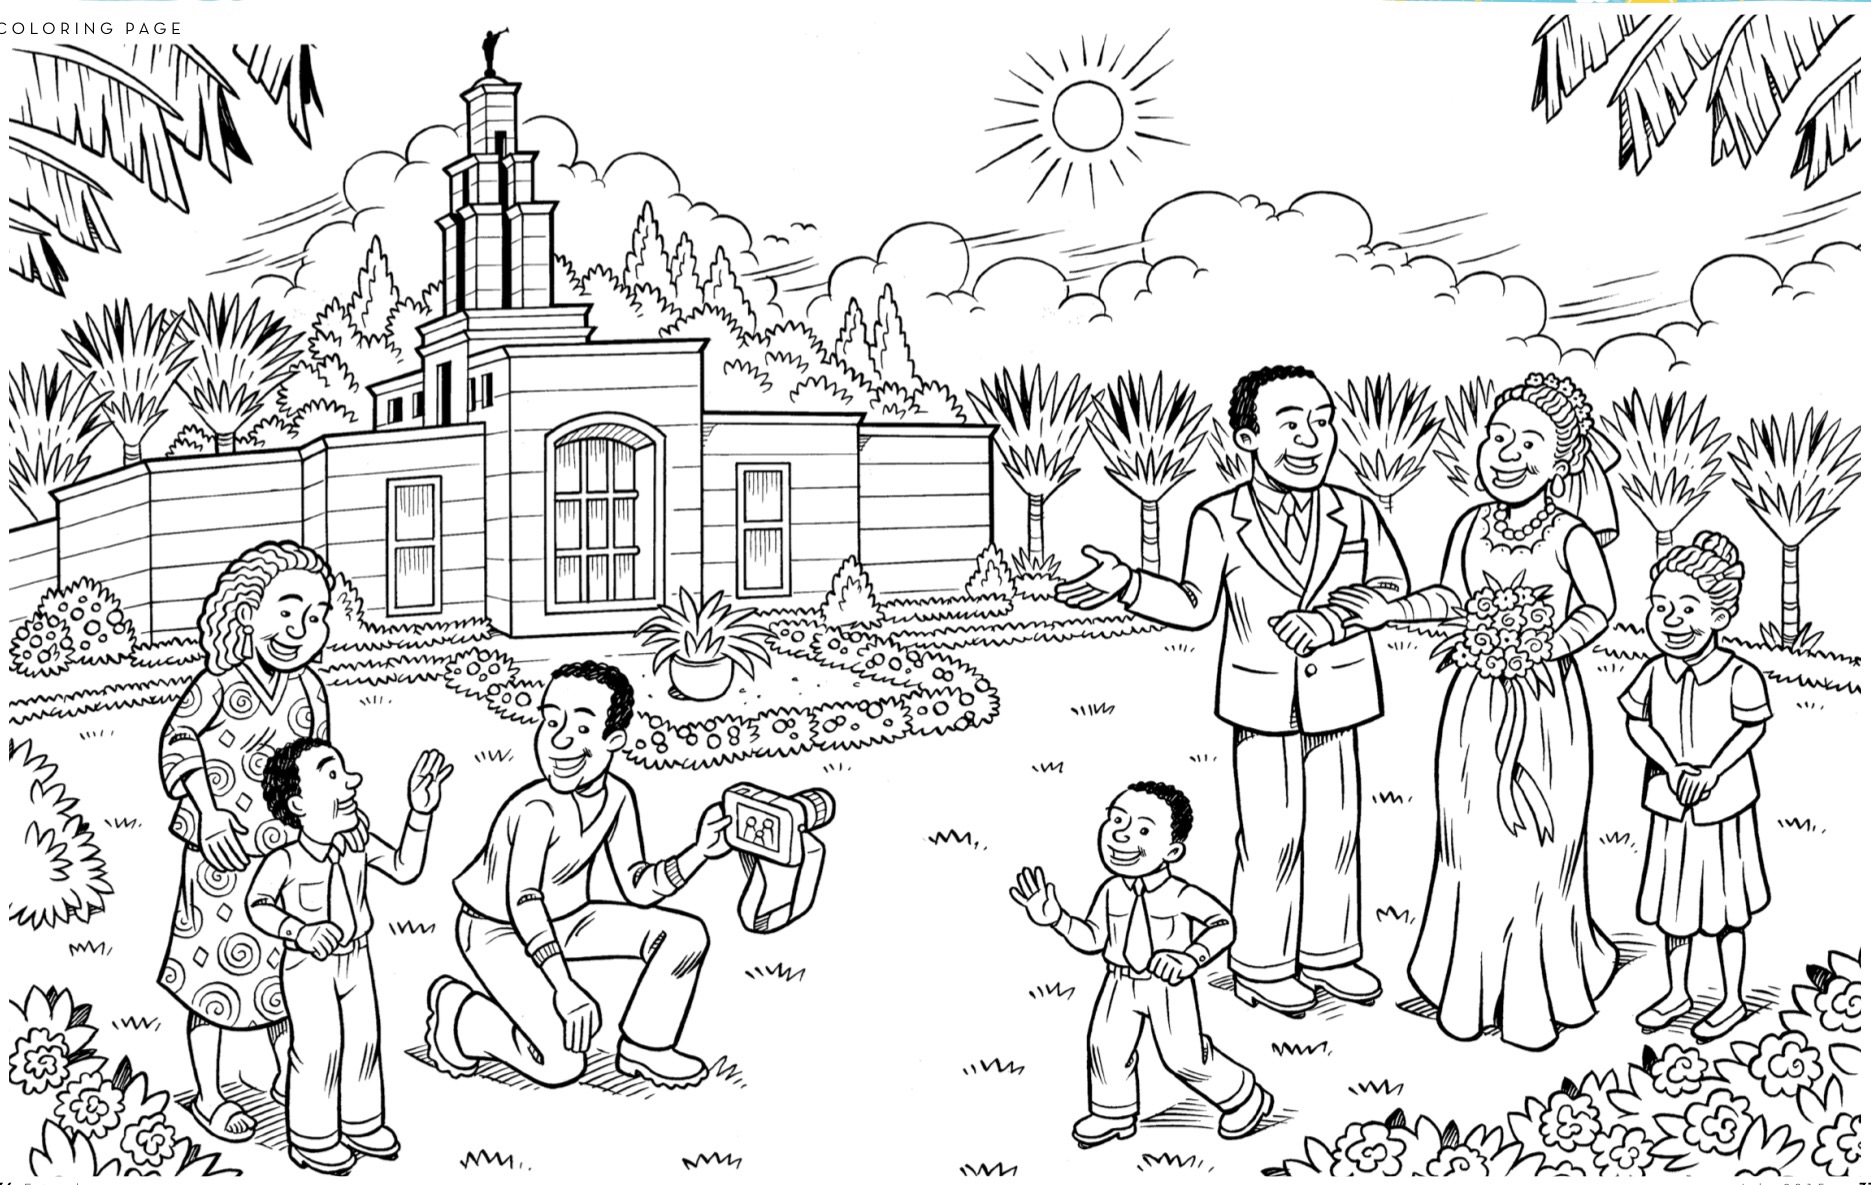 sabbath day coloring pages and activities - photo #30